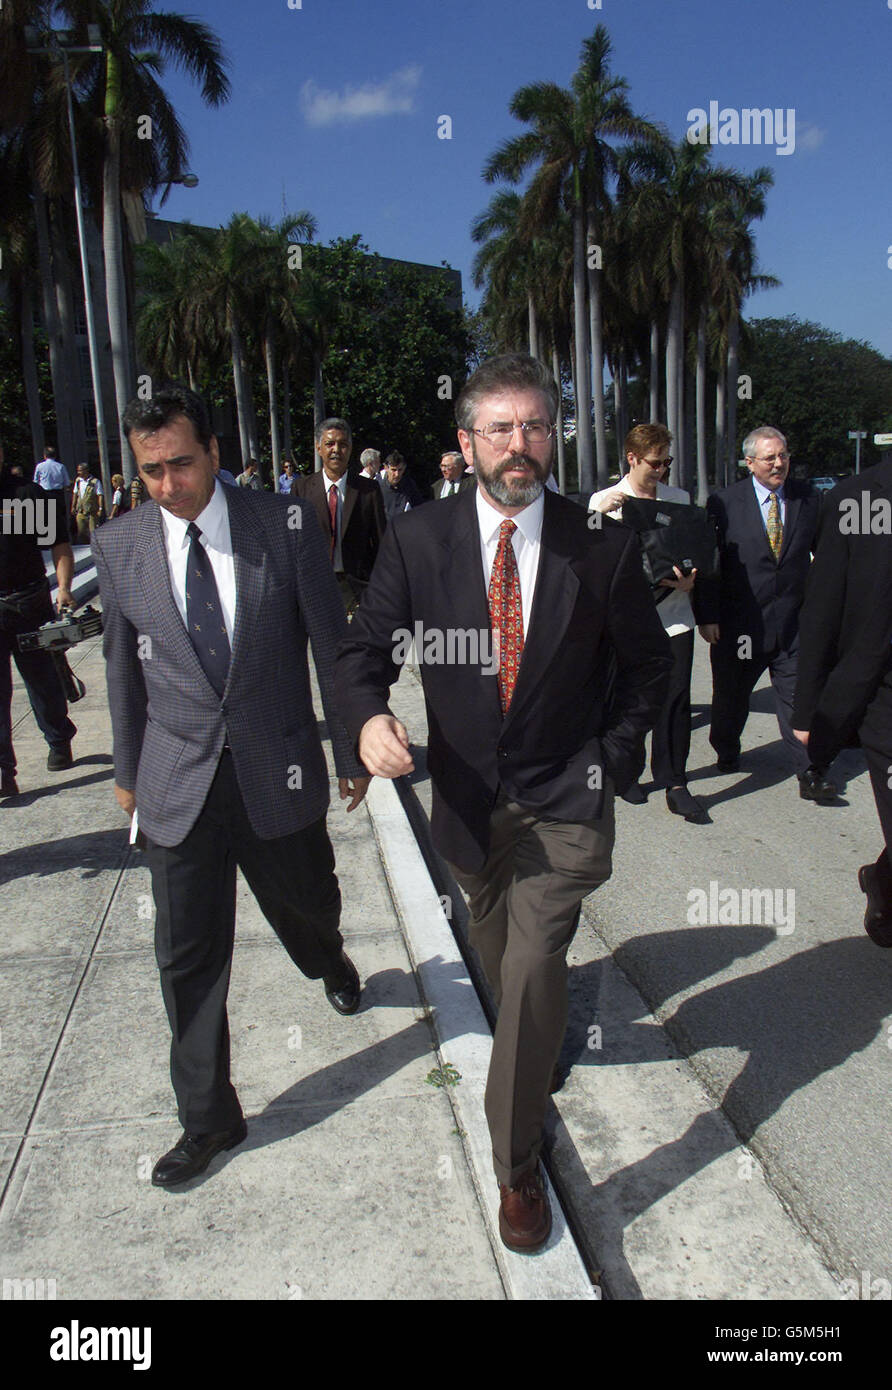 Sinn Fein President Gerry Adams with Cuban Goverment officals in Havana, Cuba. Mr Adams raised the issue of the three irish men being held in Columbia, saying they should be released. * On the first full day of his visit Mr Adams spent the day in a series of meetings with leading Cuban government officials including the president of the National Assembly Ricardo Alacon. Stock Photo